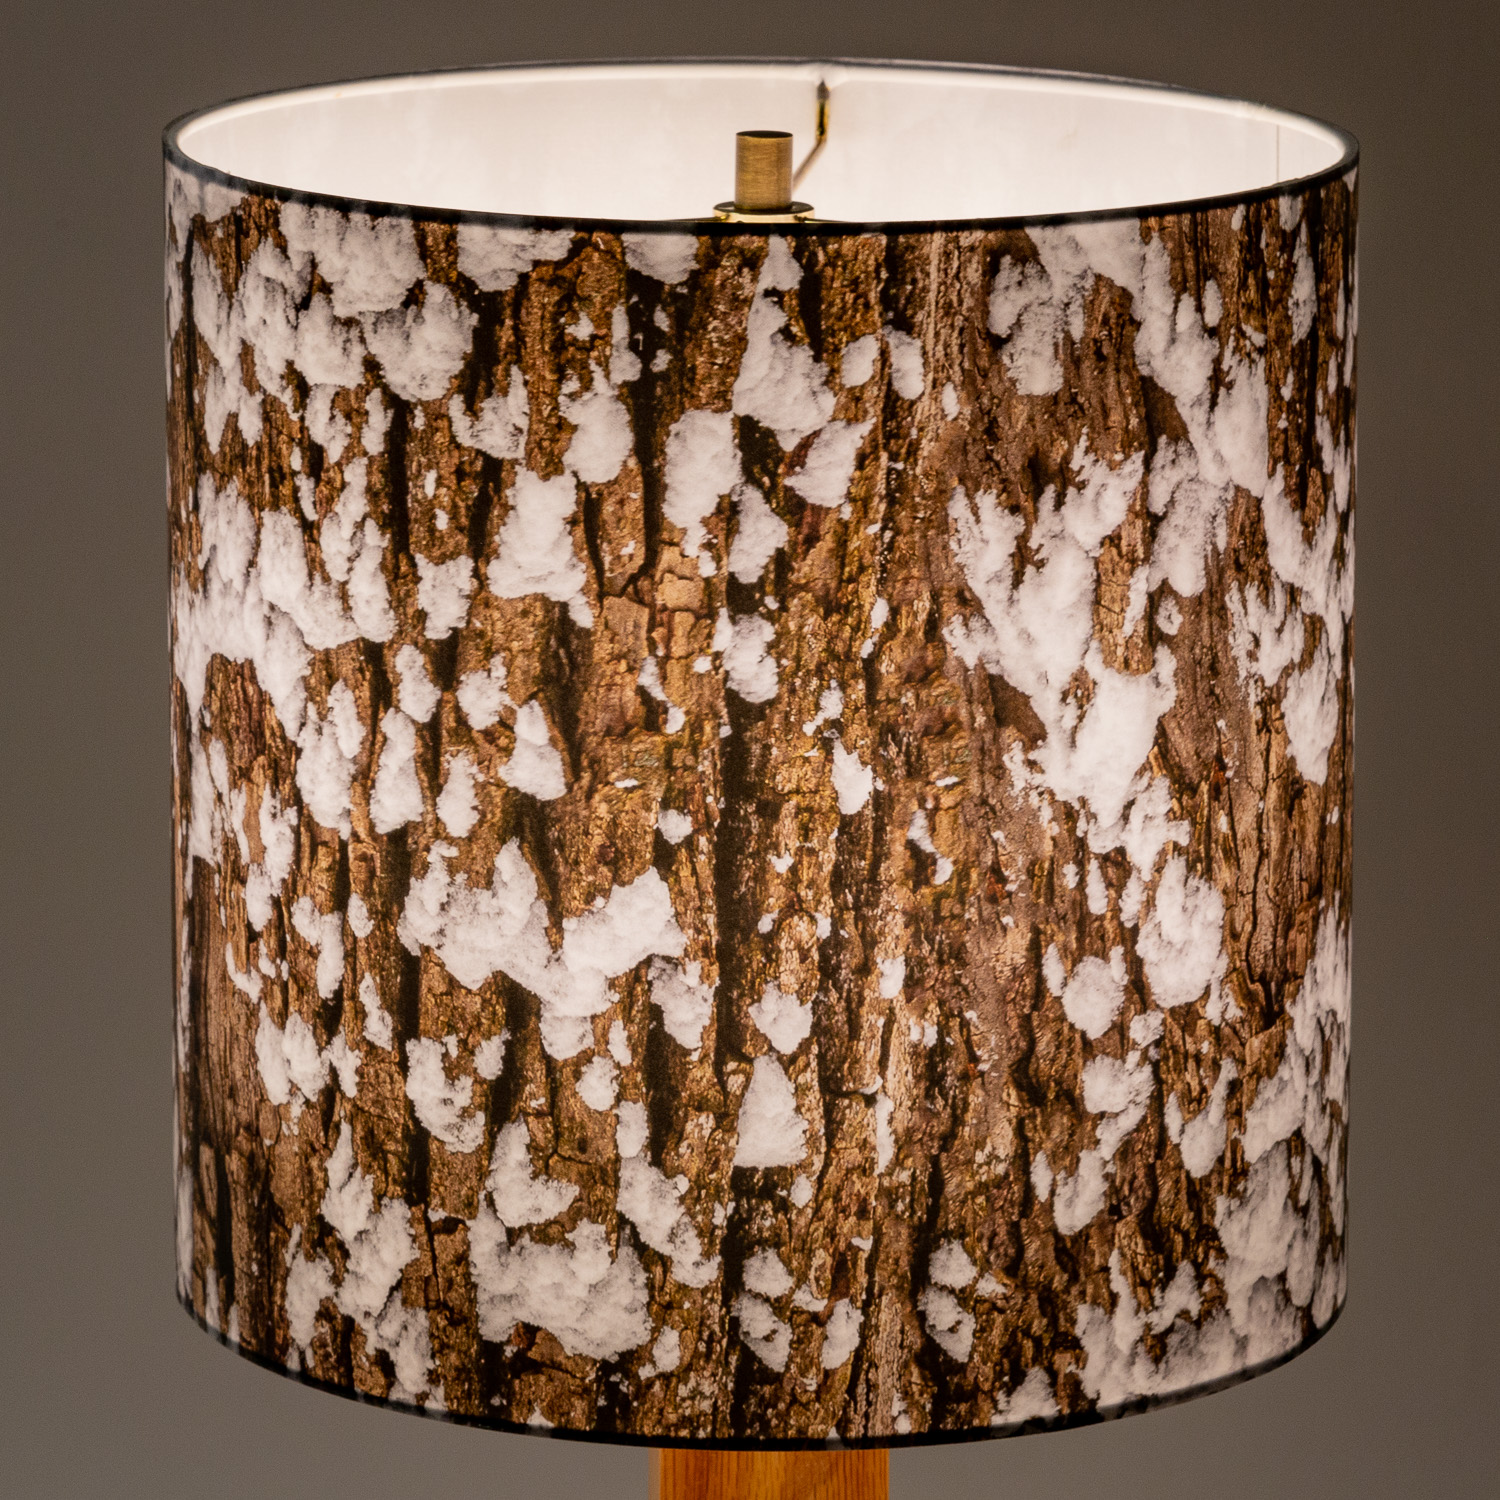 109: Snow on the bark of a cottonwood tree -- Photo on Lamp shade by David Elmore